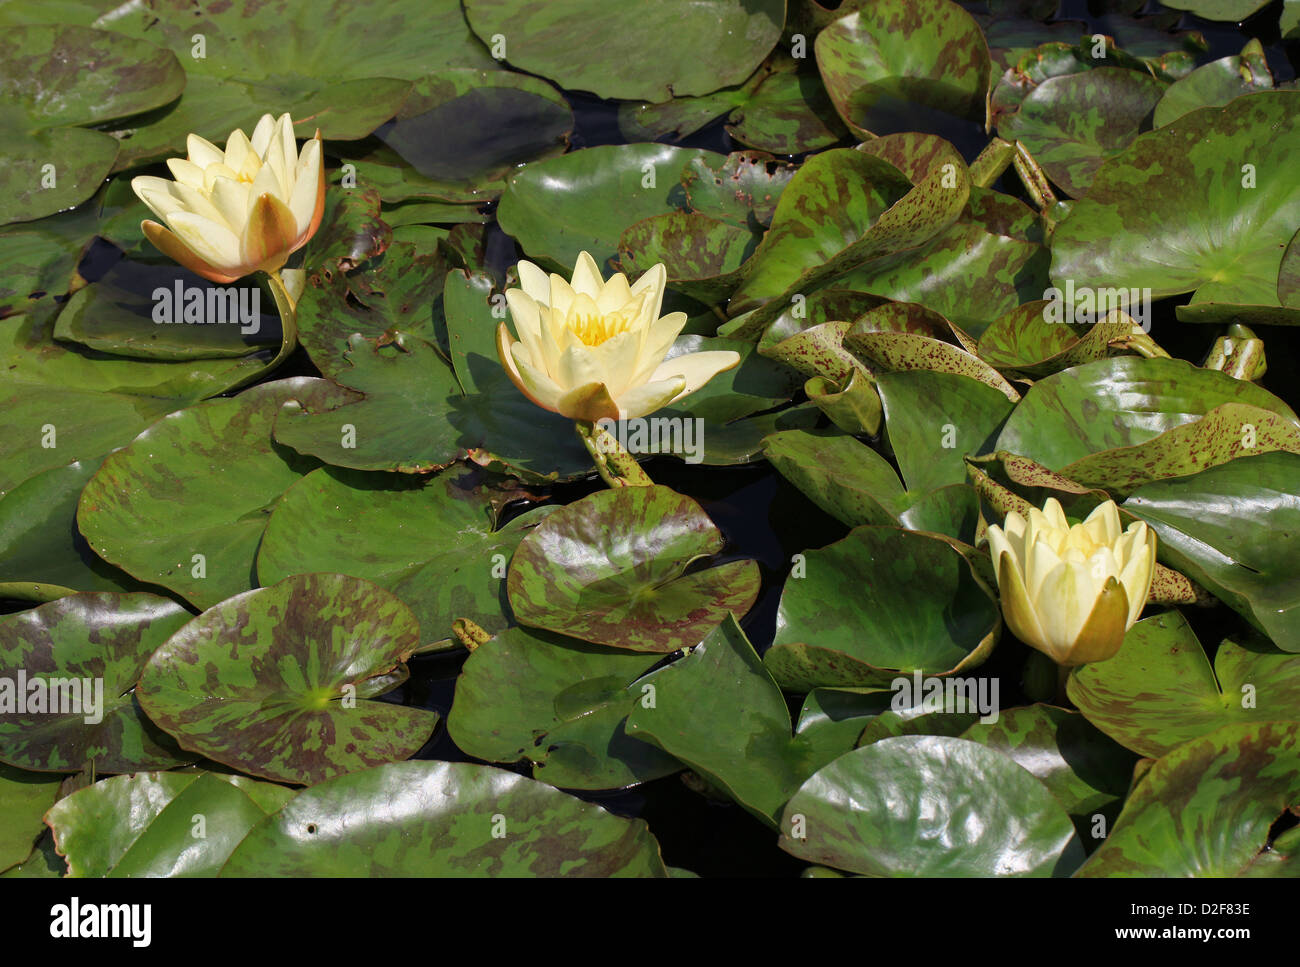 Hardy Water Lily, Nymphaea x marliacea "Chromatella", Nymphaeaceae. Stock Photo